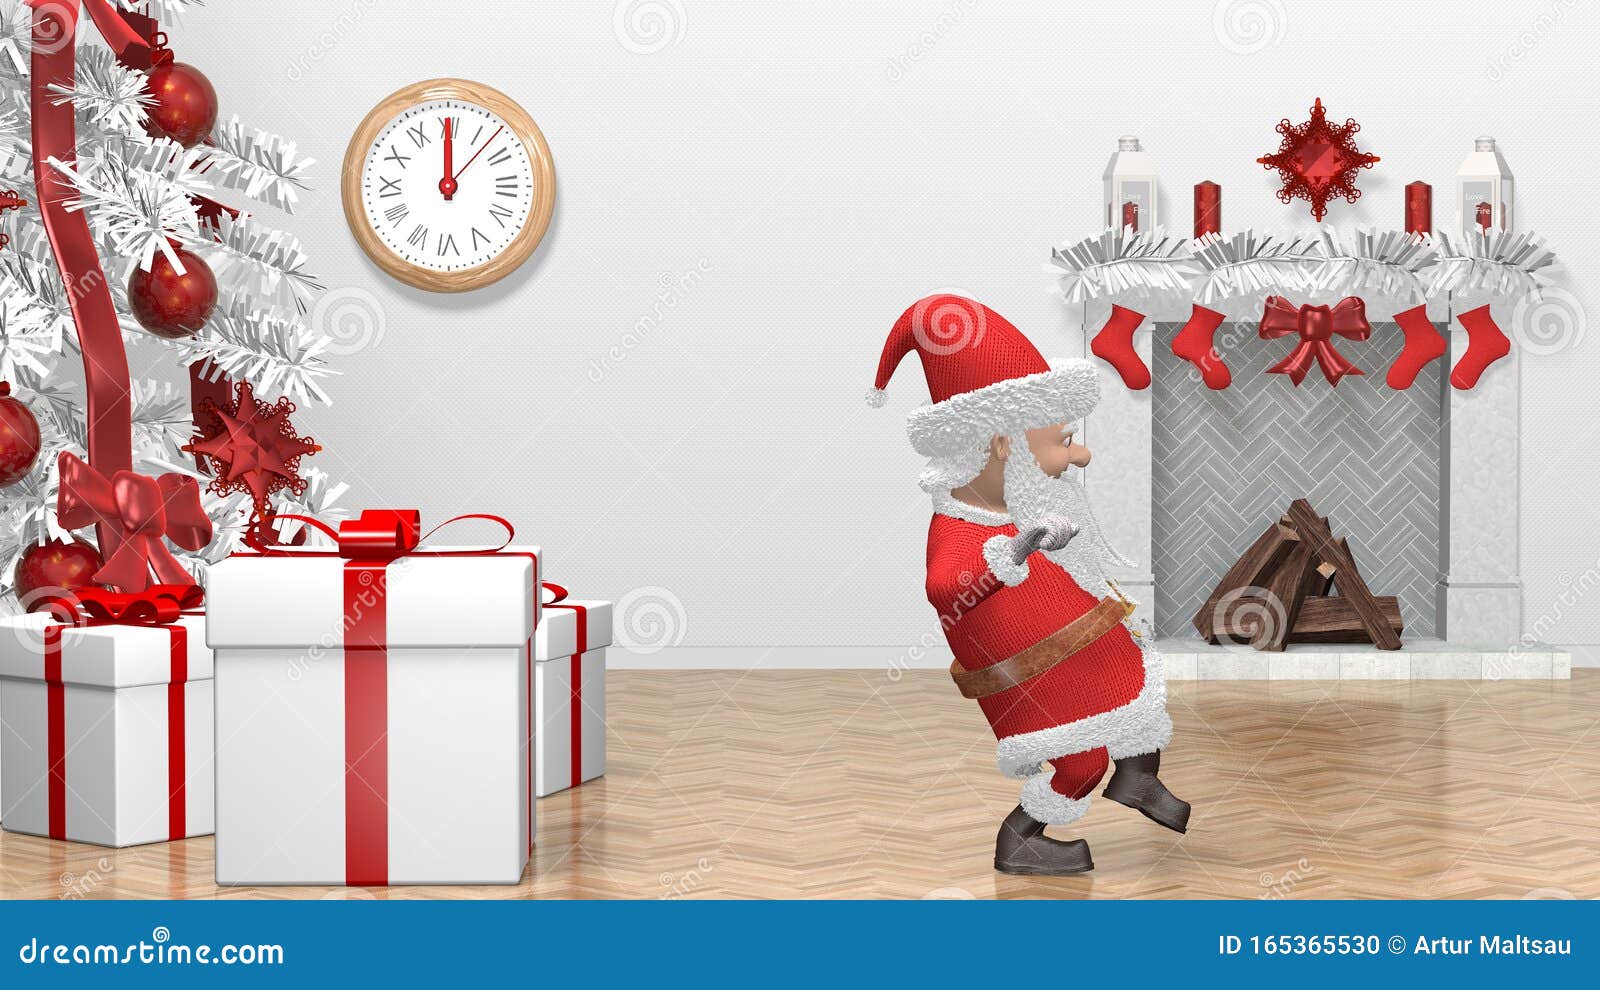 Santa Claus Pushing Gift. Merry Christmas and Happy New Year 2020